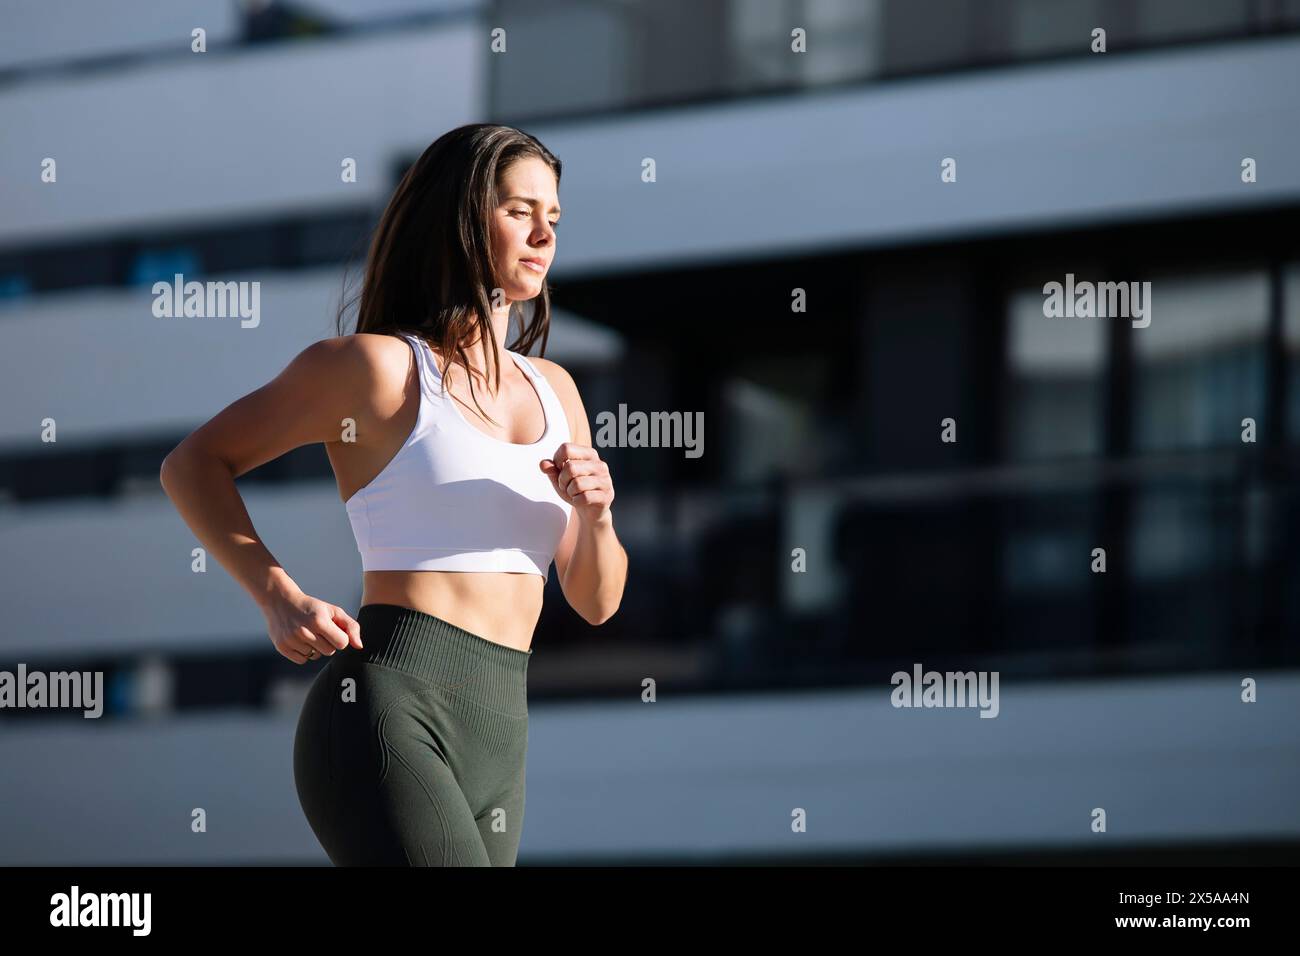 A fitness-focused woman in sportswear is jogging outside a modern building, exhibiting an active lifestyle Stock Photo